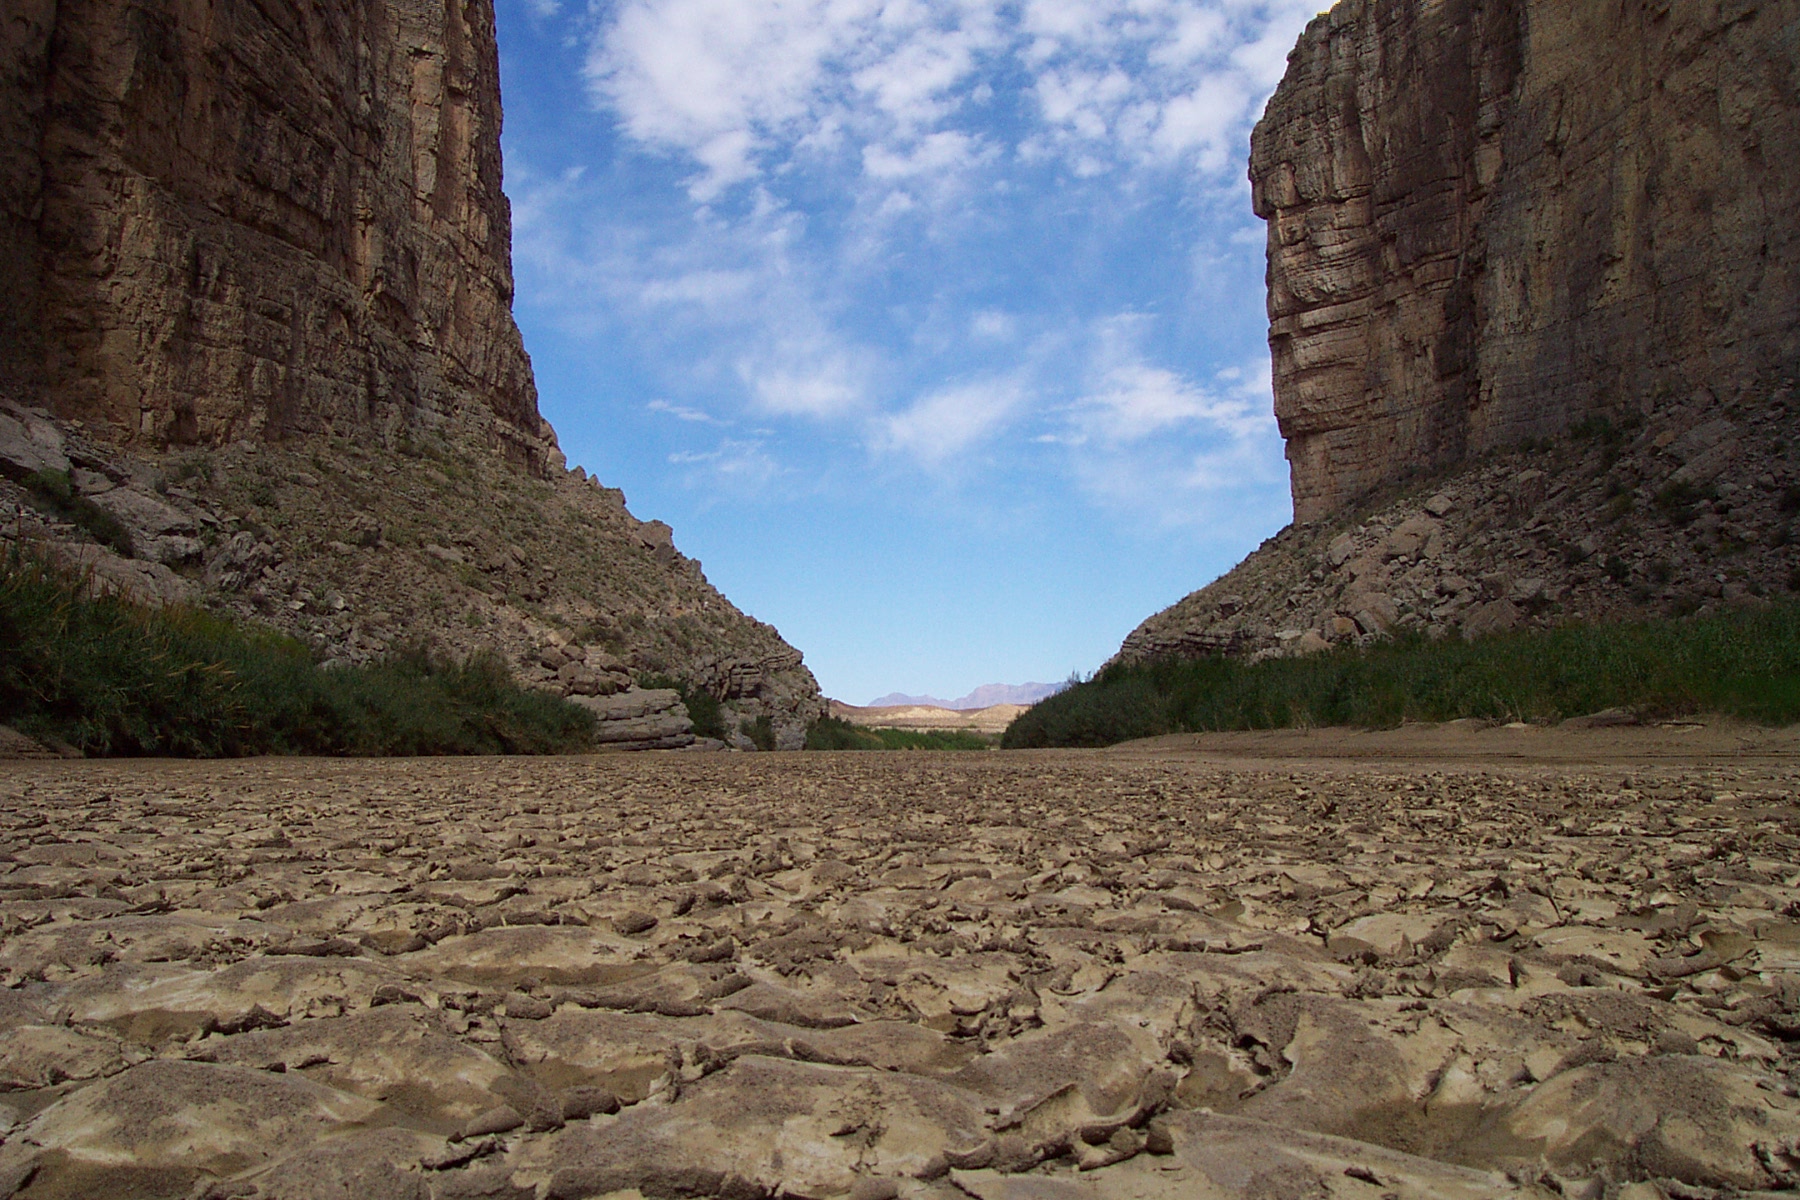 File:Big Bend National Park - Rio Grande riverbed with cracked mud ...